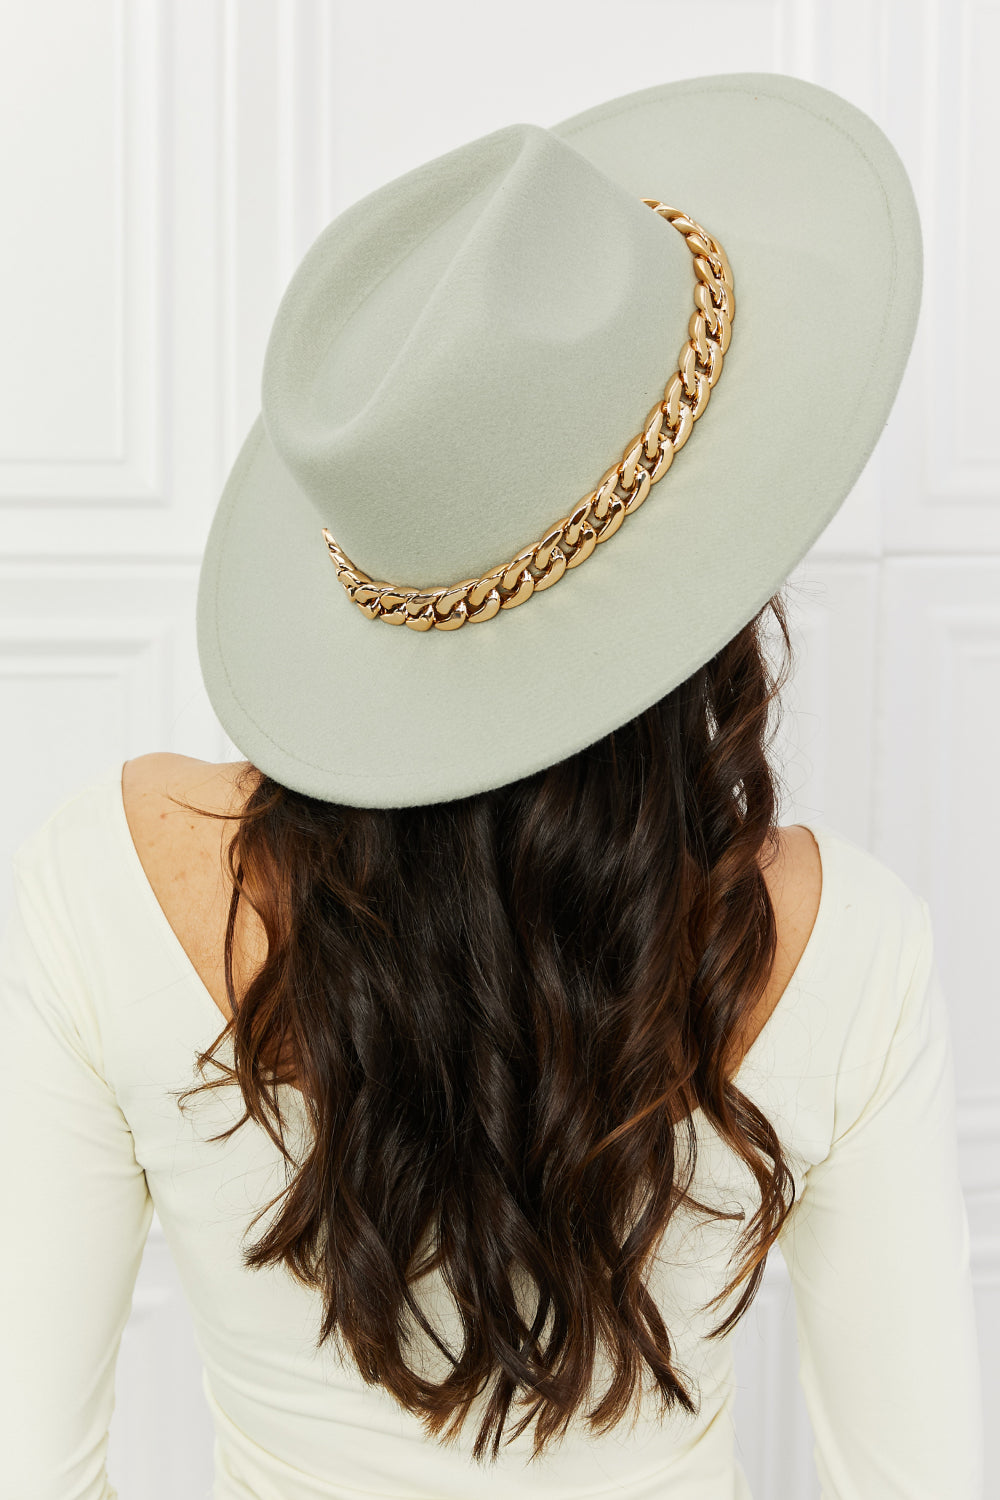 Fame Keep Your Promise Fedora Hat in Mint - Cheeky Chic Boutique